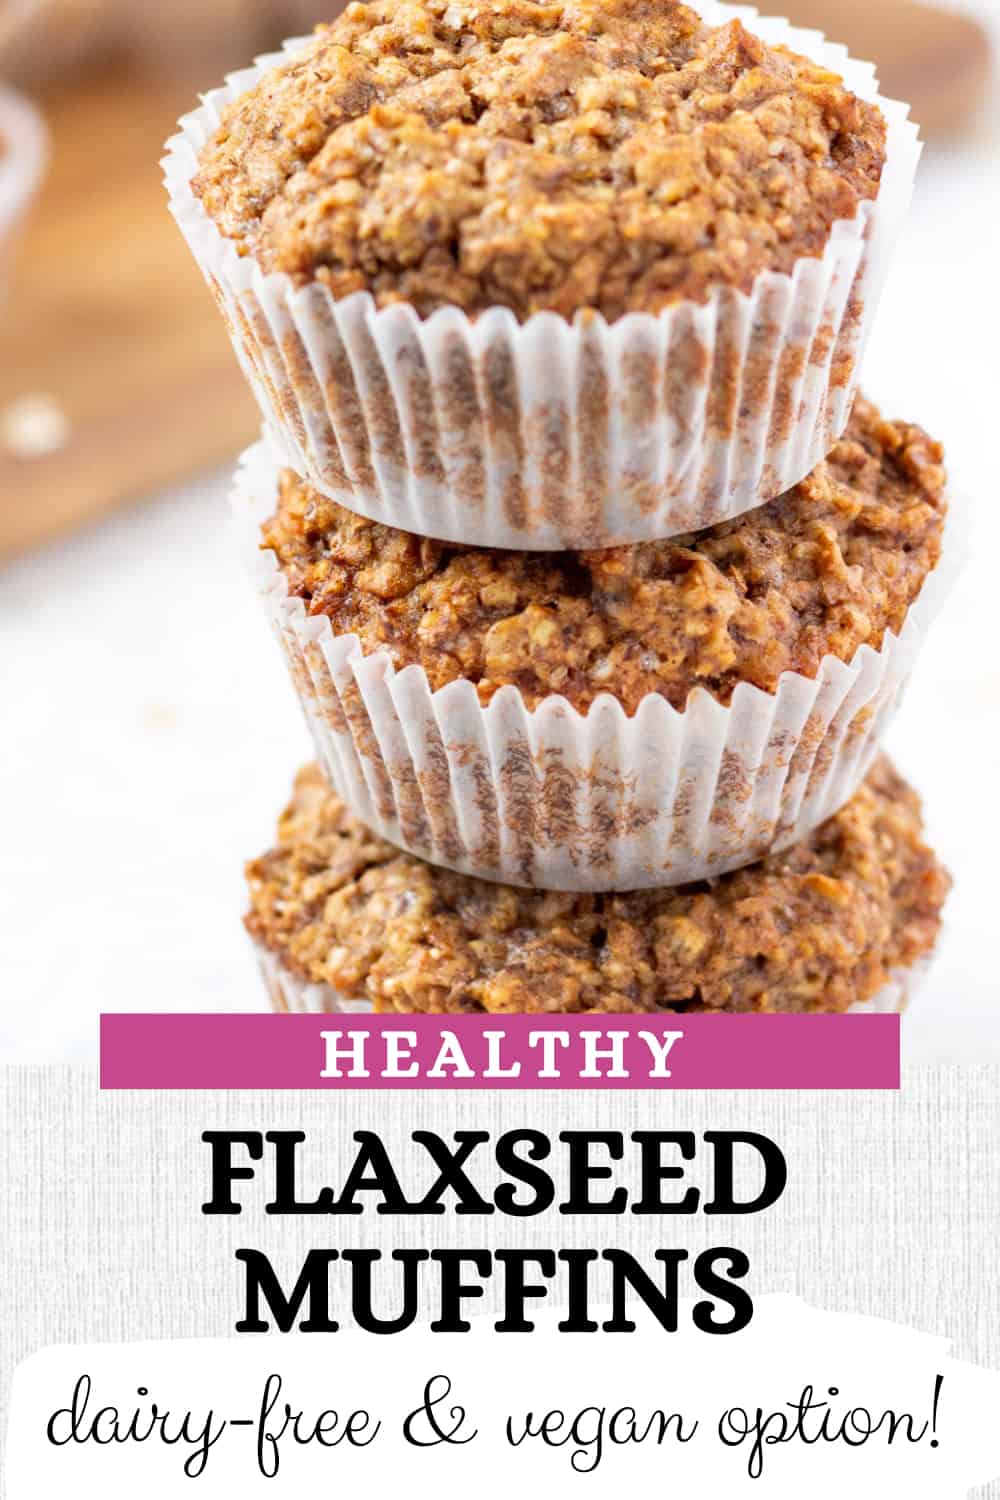 Flaxseed Muffins